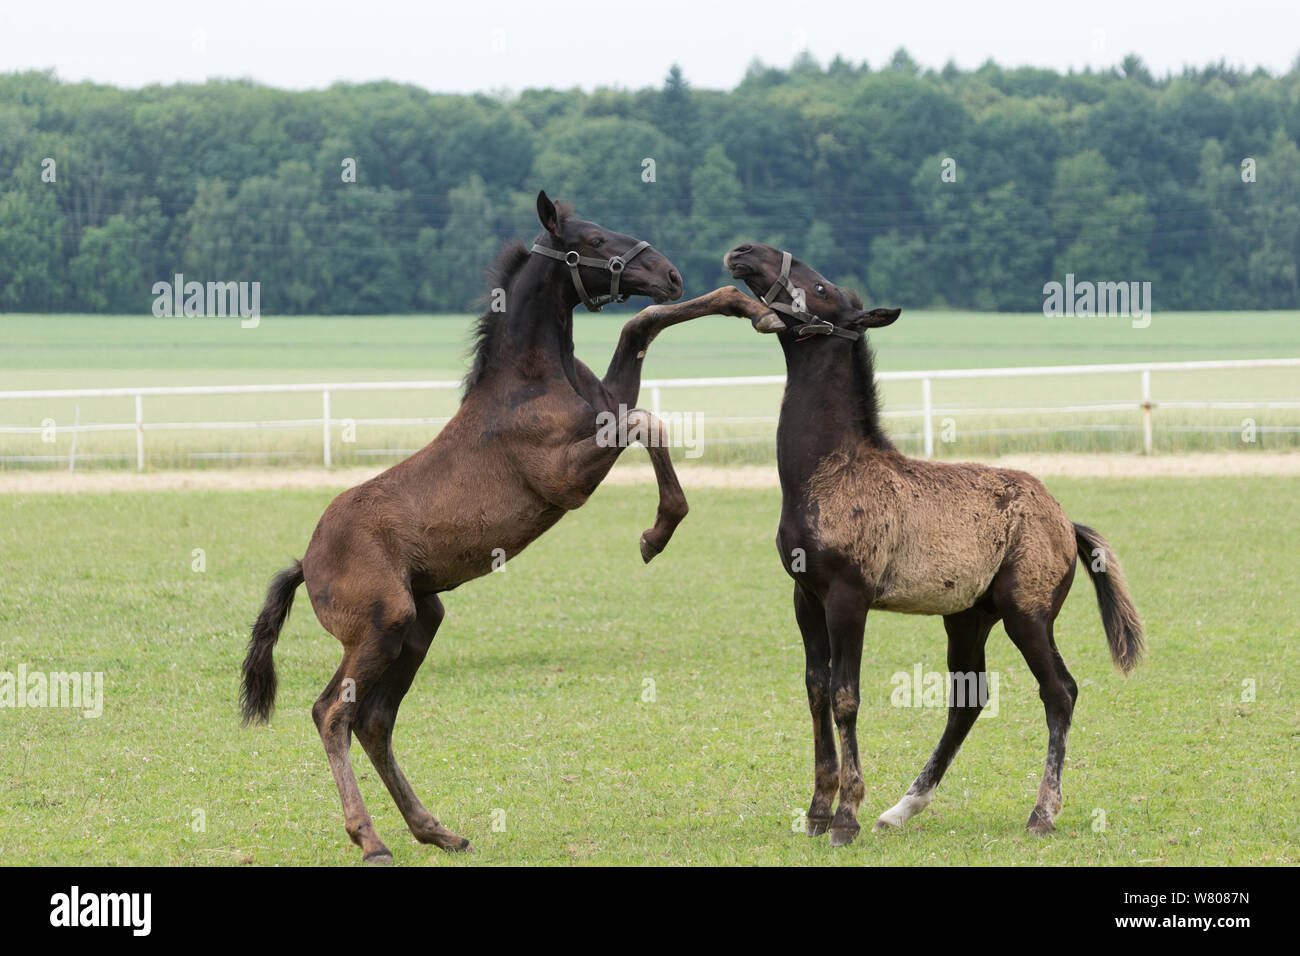 Two rare black Kladruber colts / foals playfighting, in Slatinany National Stud, Pardubice Region, Czech Republic. June. Stock Photo